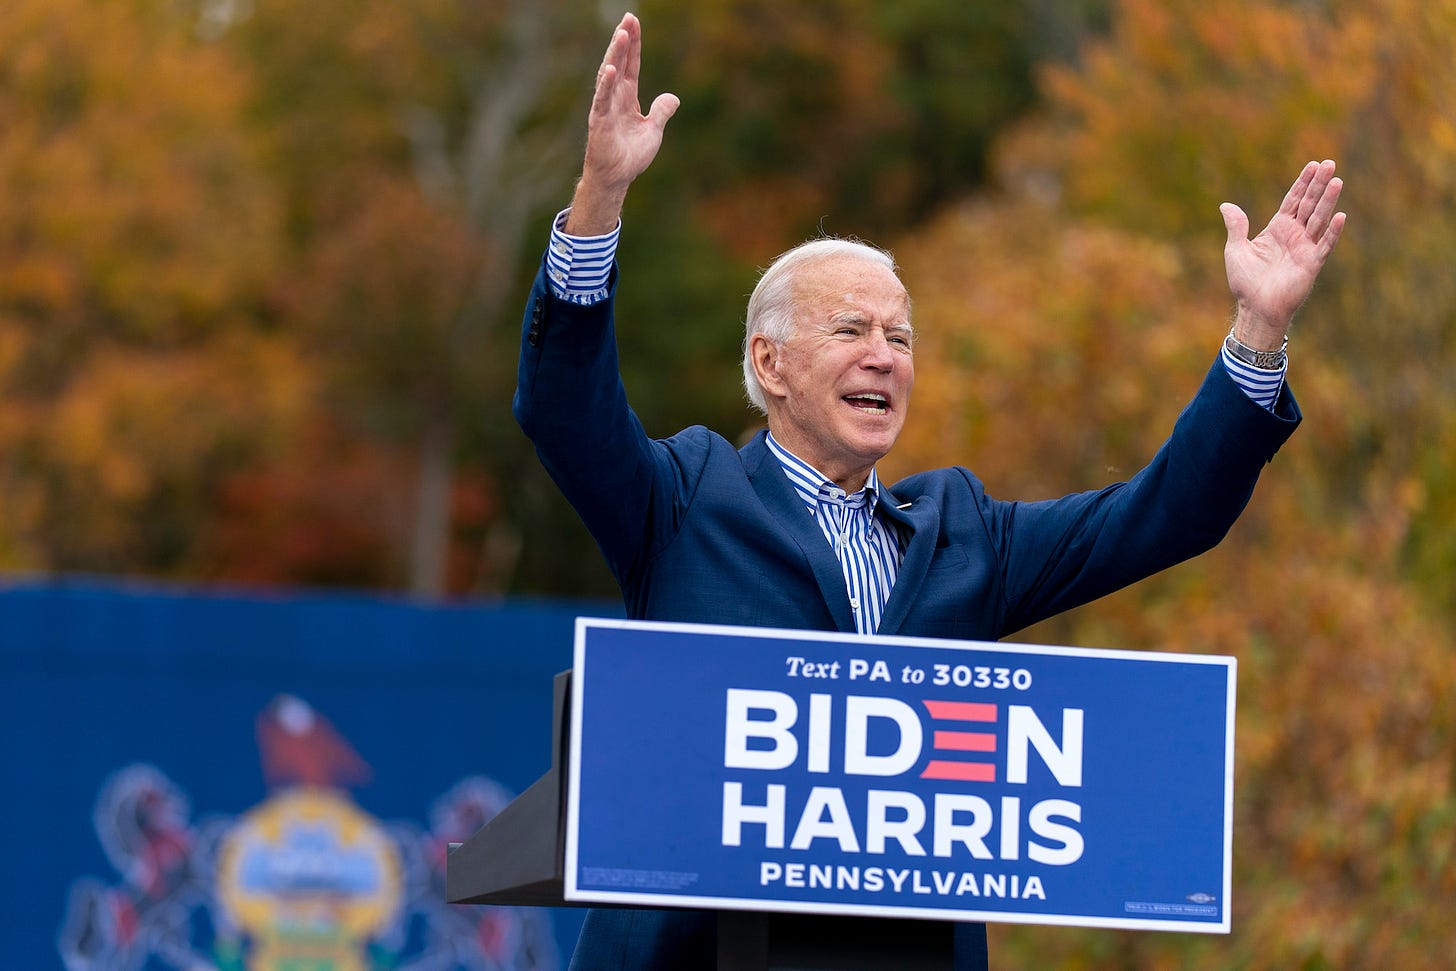 Biden makes his case at key Bucks County drive-in rally - WHYY